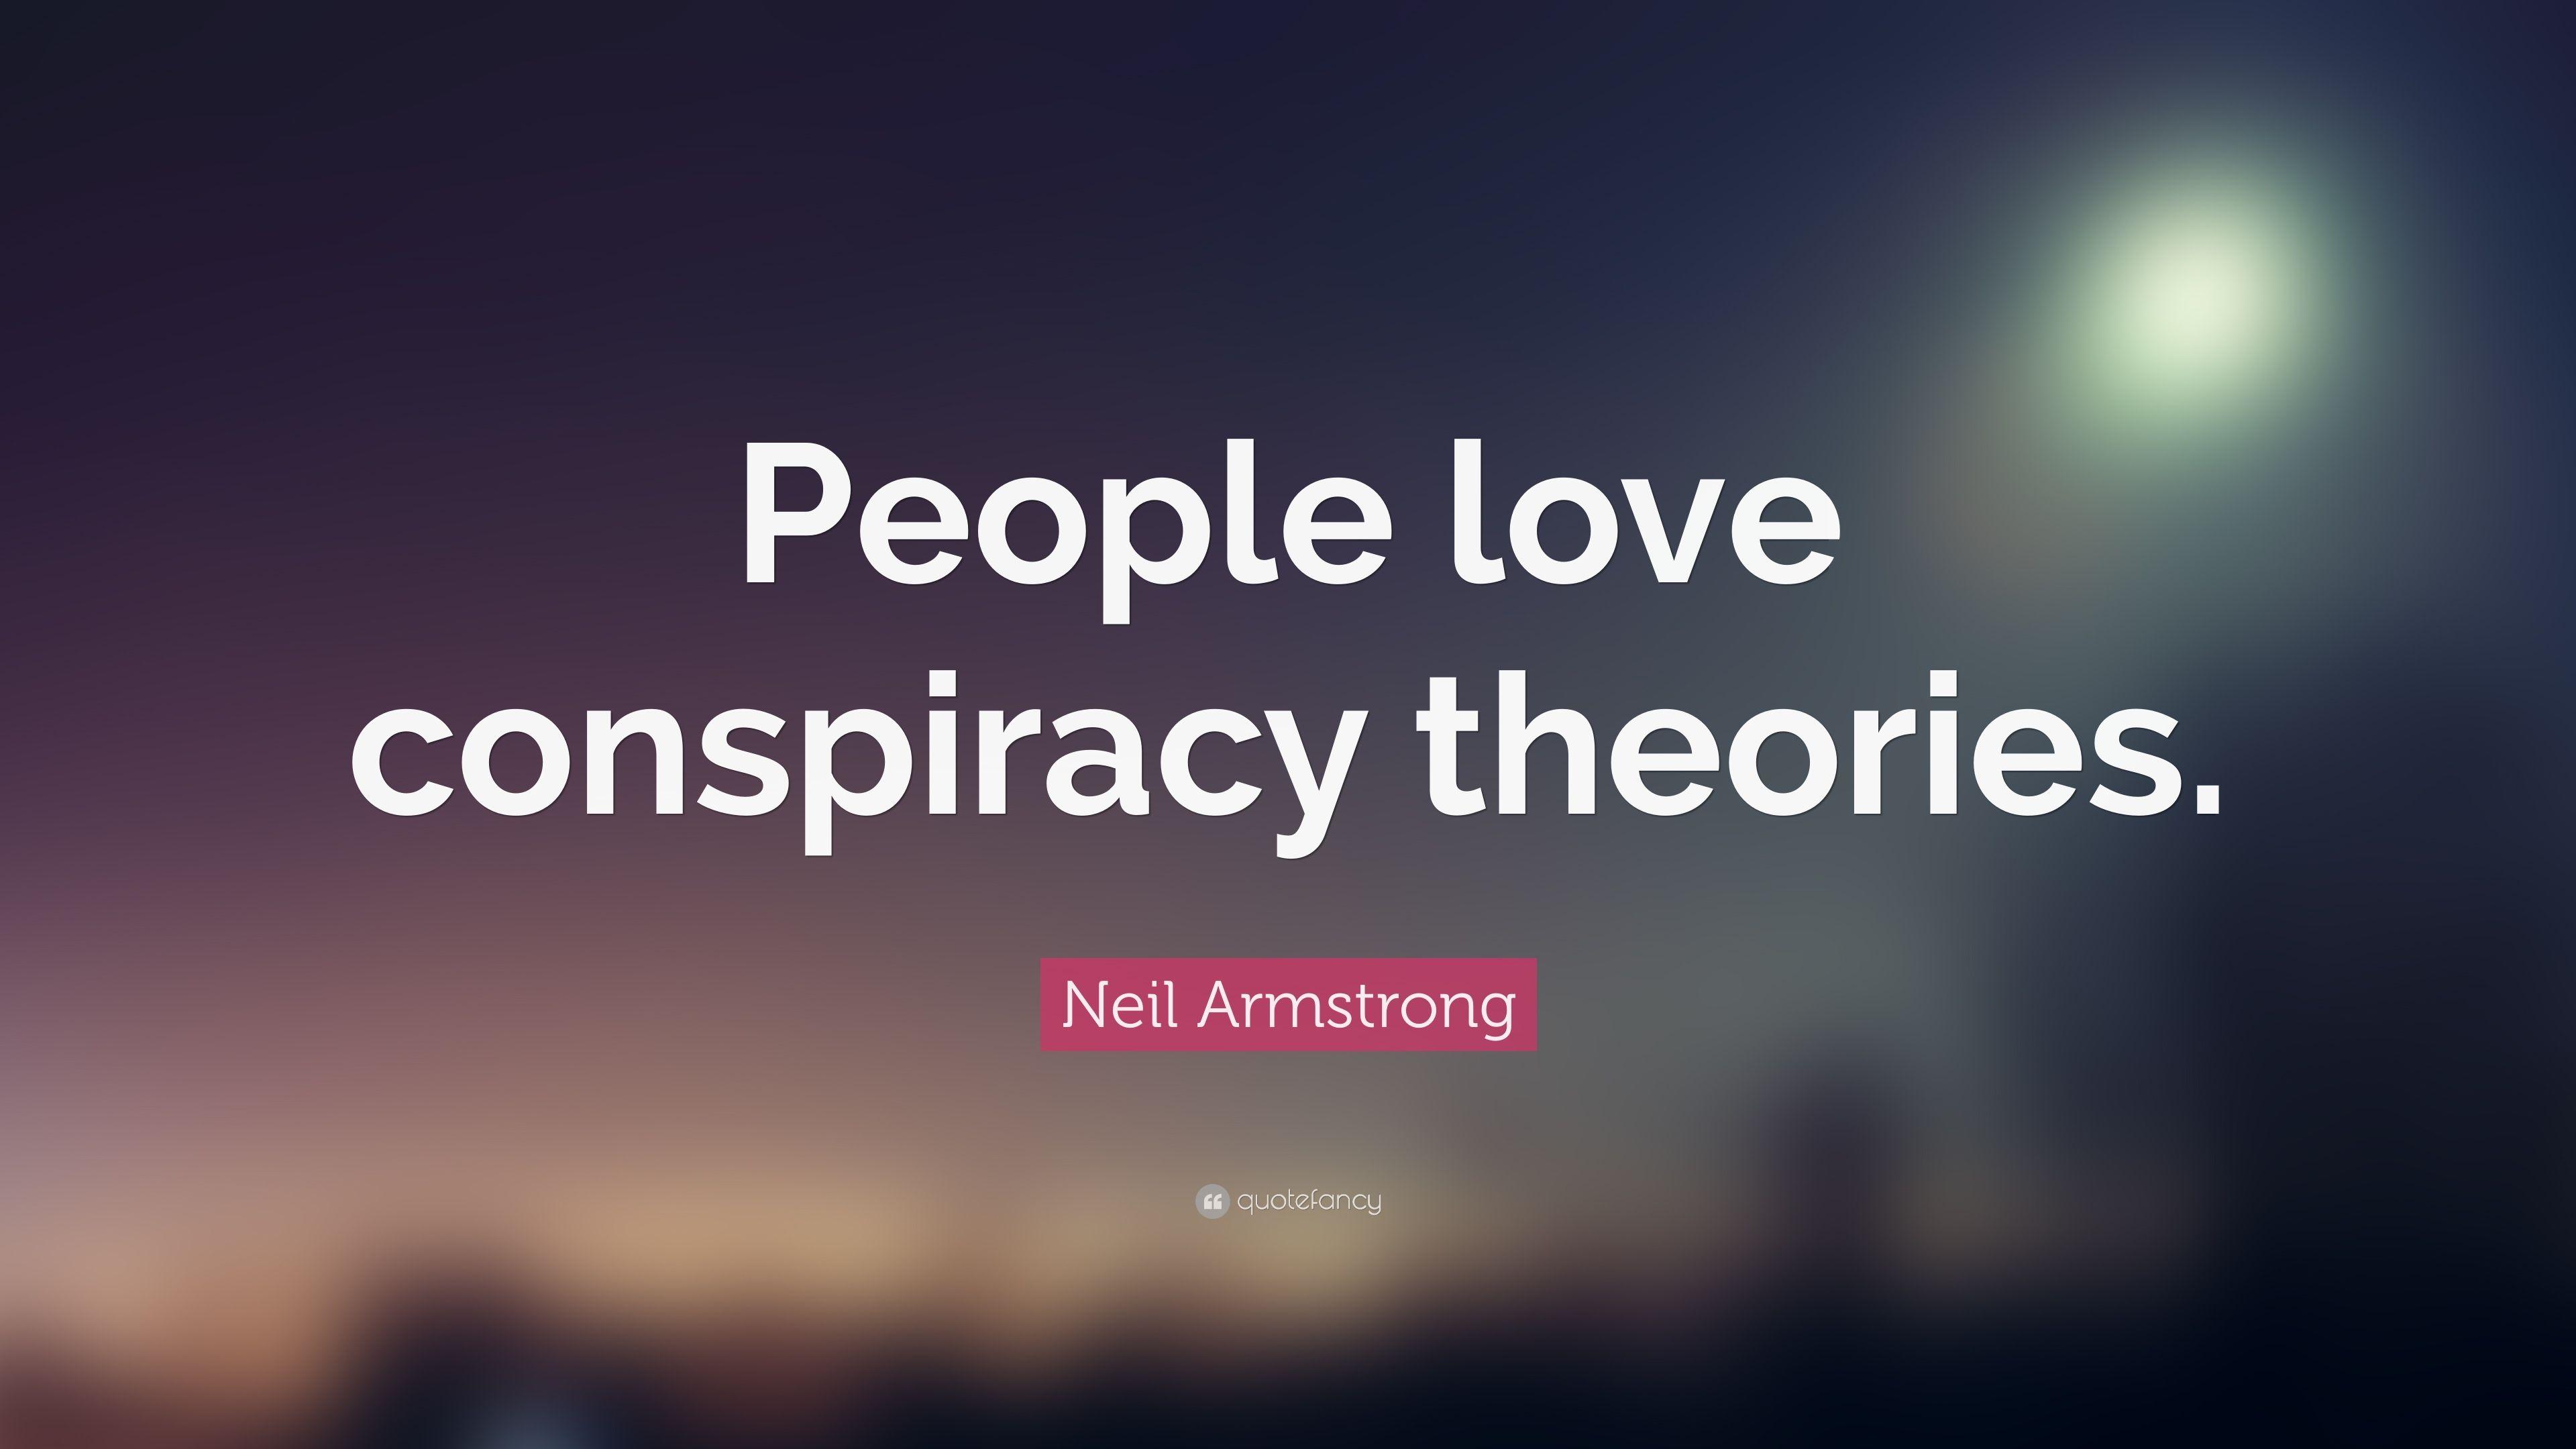 Neil Armstrong Quote: “People love conspiracy theories.” 10